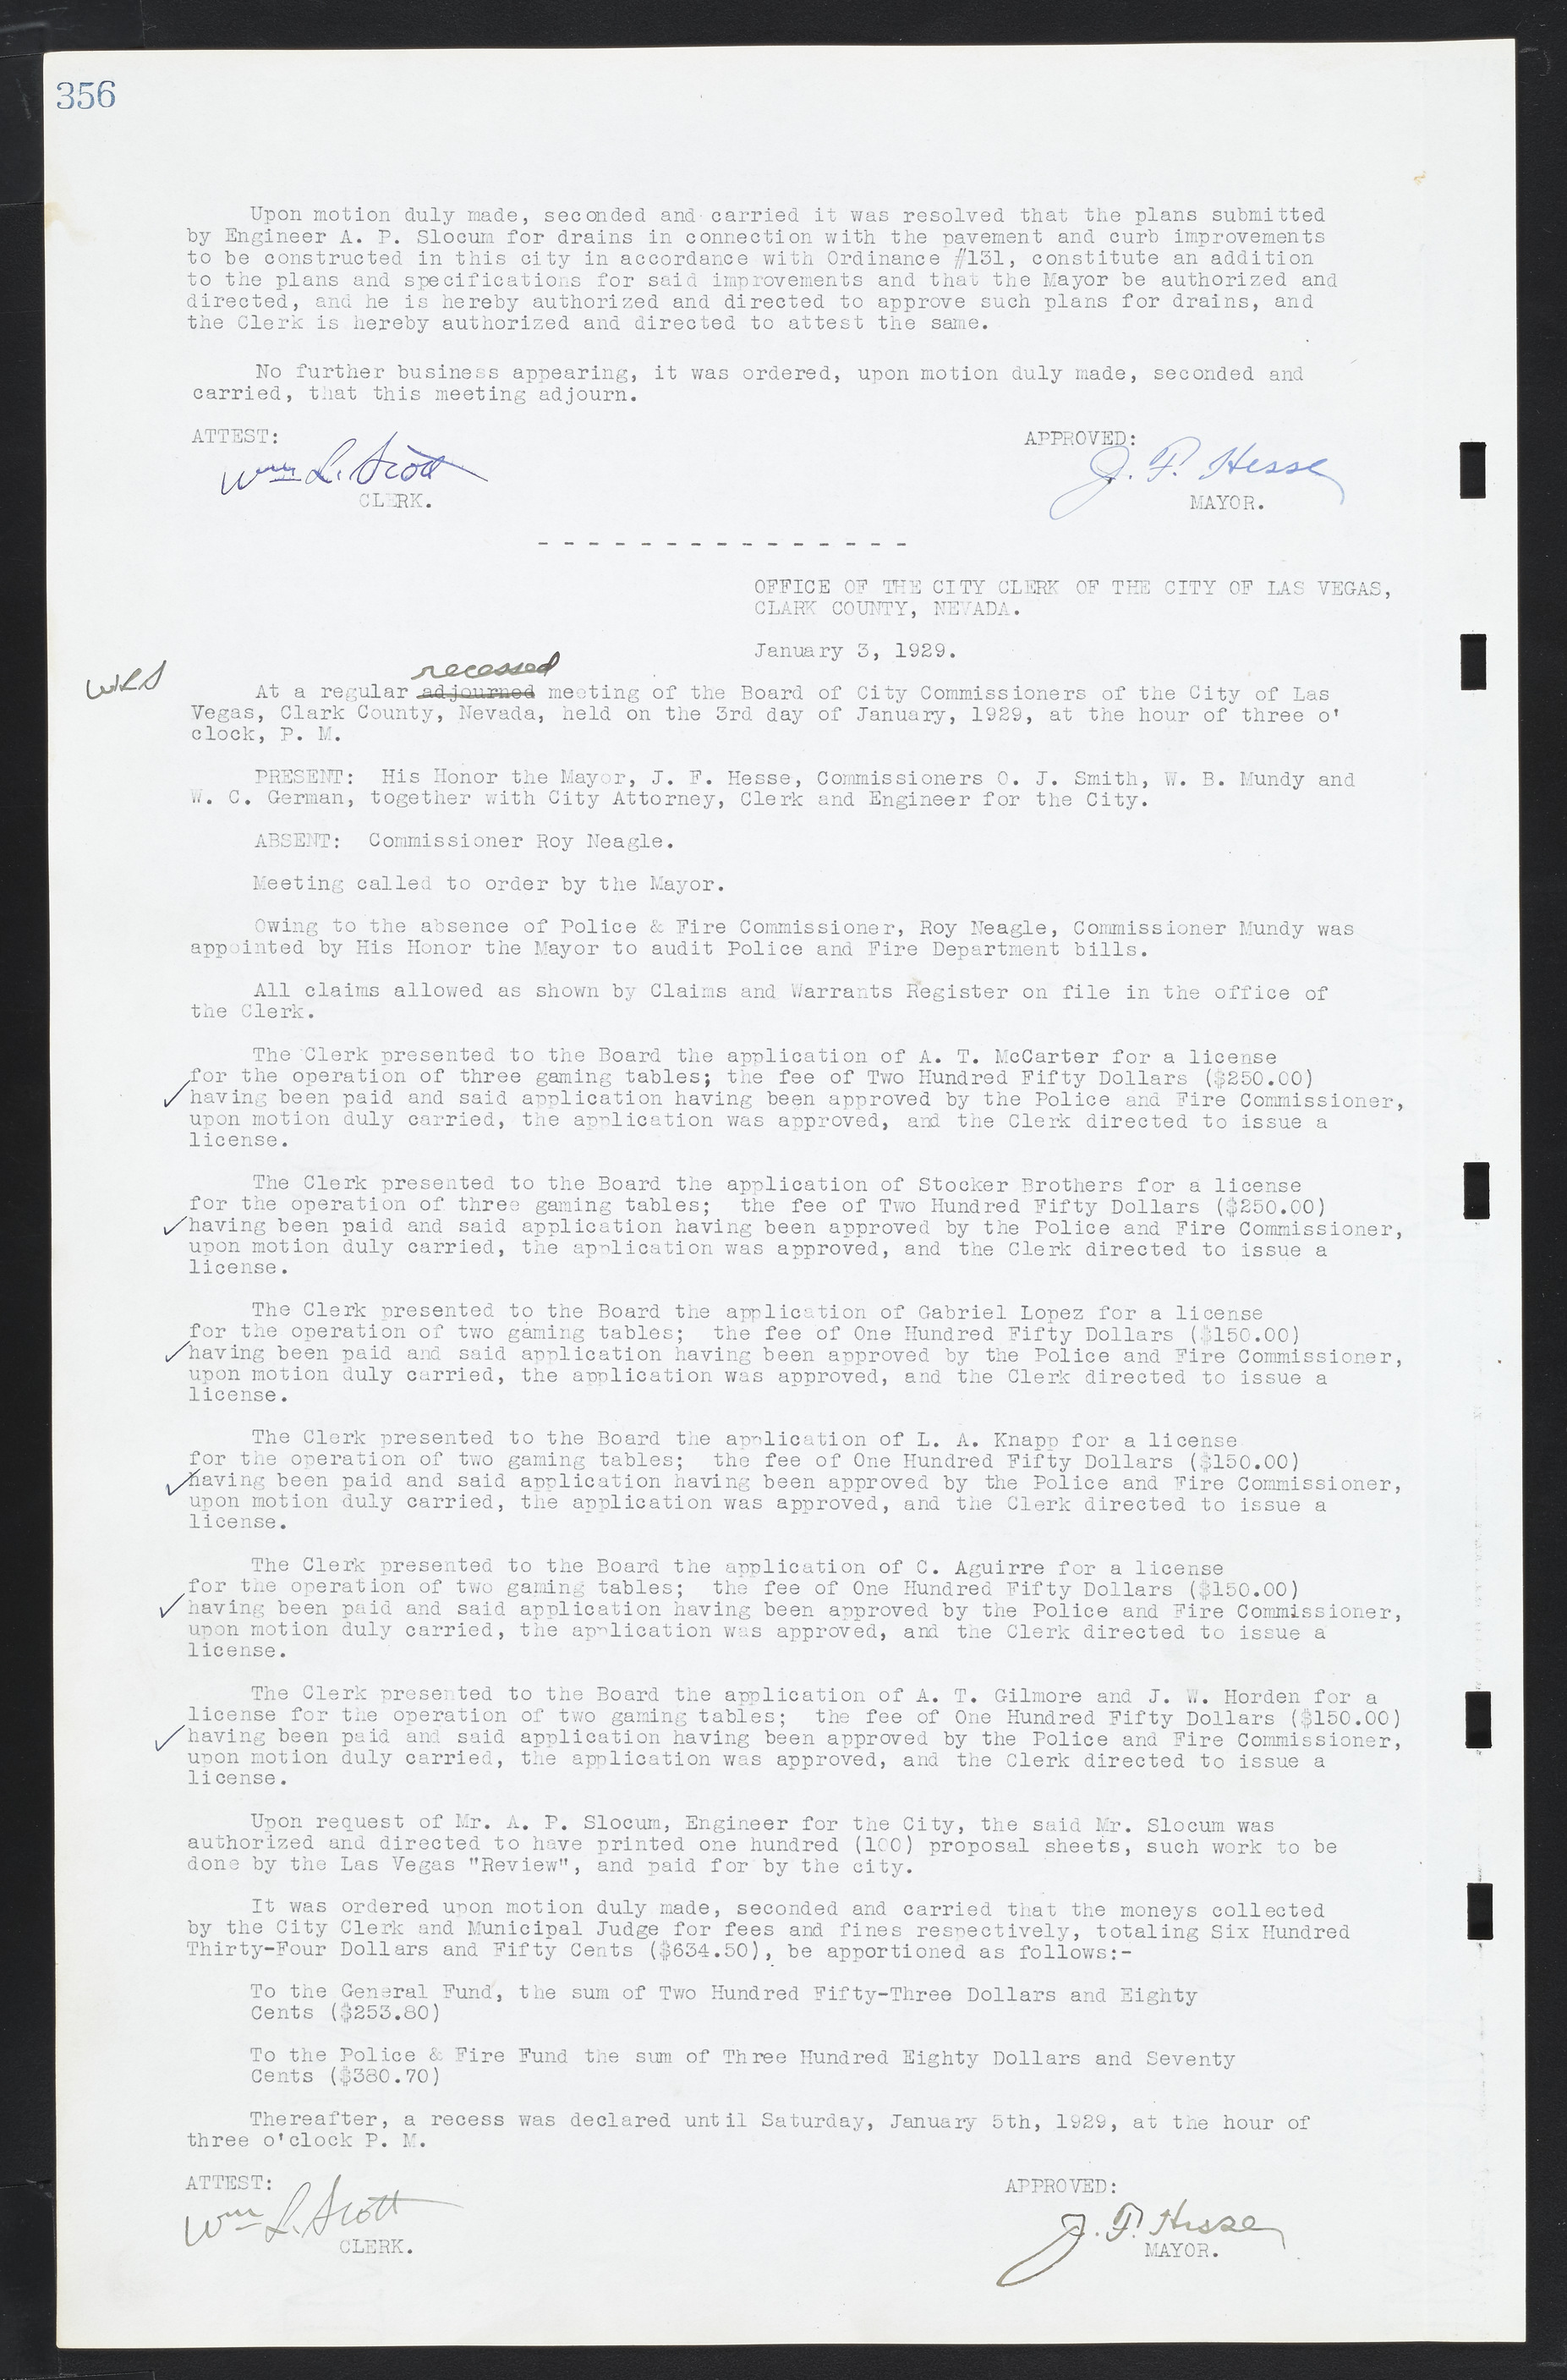 Las Vegas City Commission Minutes, March 1, 1922 to May 10, 1929, lvc000002-365